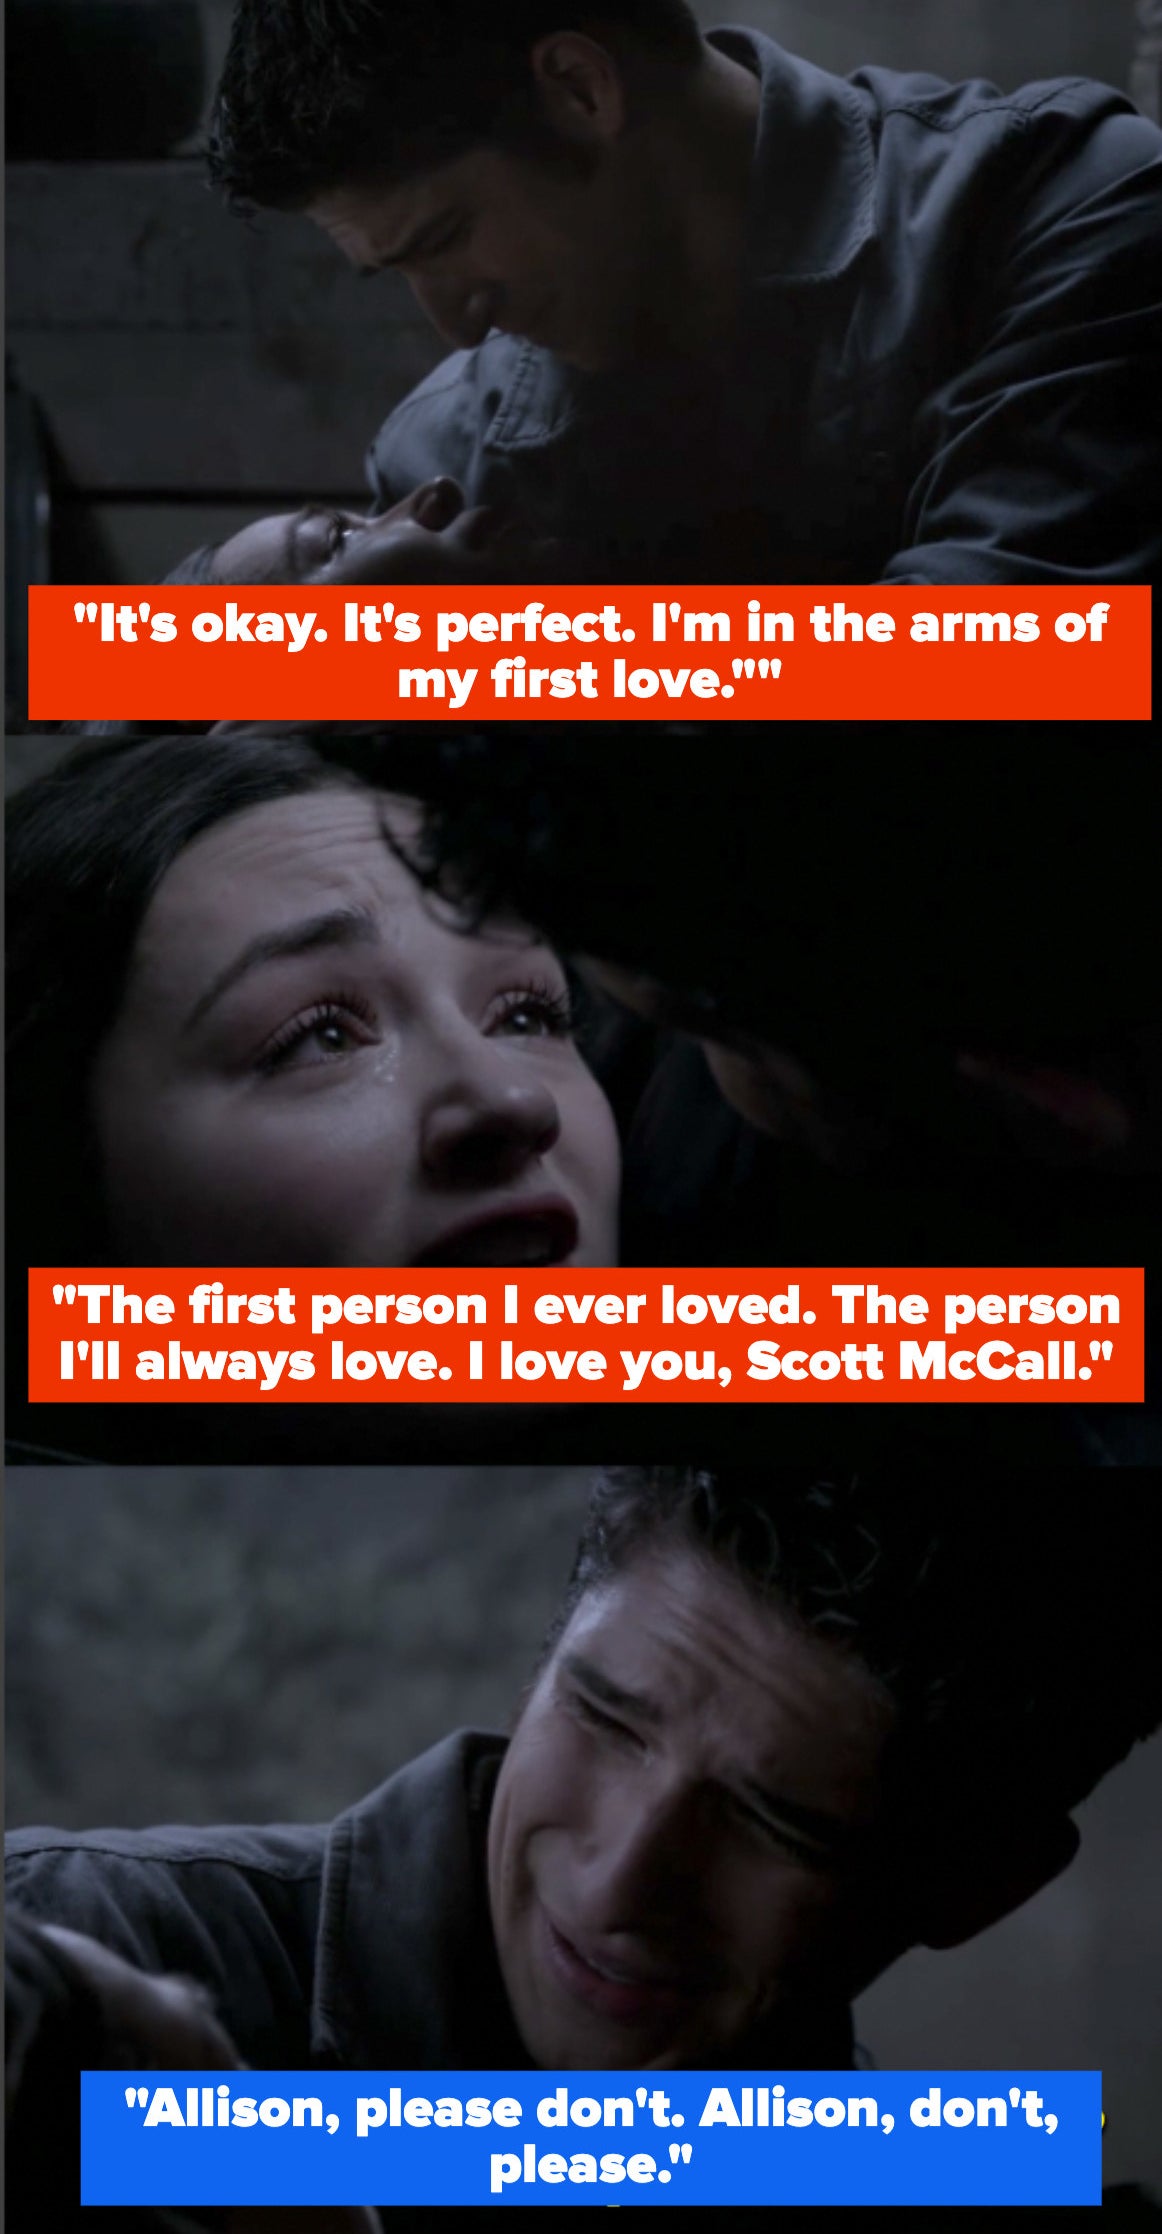 Allison says it&#x27;s perfect, because she&#x27;s in the arms of her first love, the person she&#x27;ll always love. She says she loves Scott, and Scott begs her to stay with him